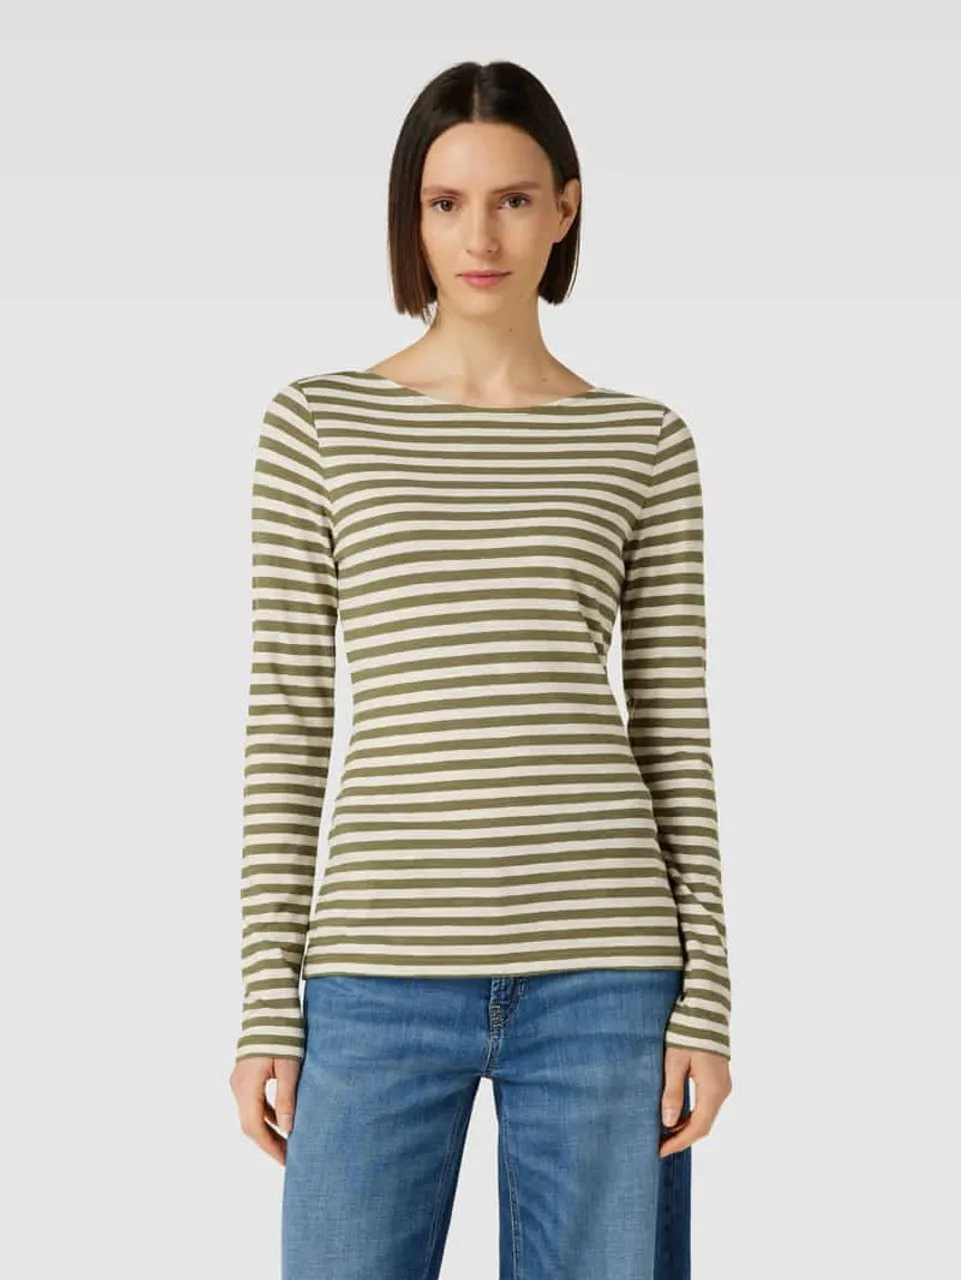 Marc O'Polo Longsleeve mit Streifenmuster in Oliv